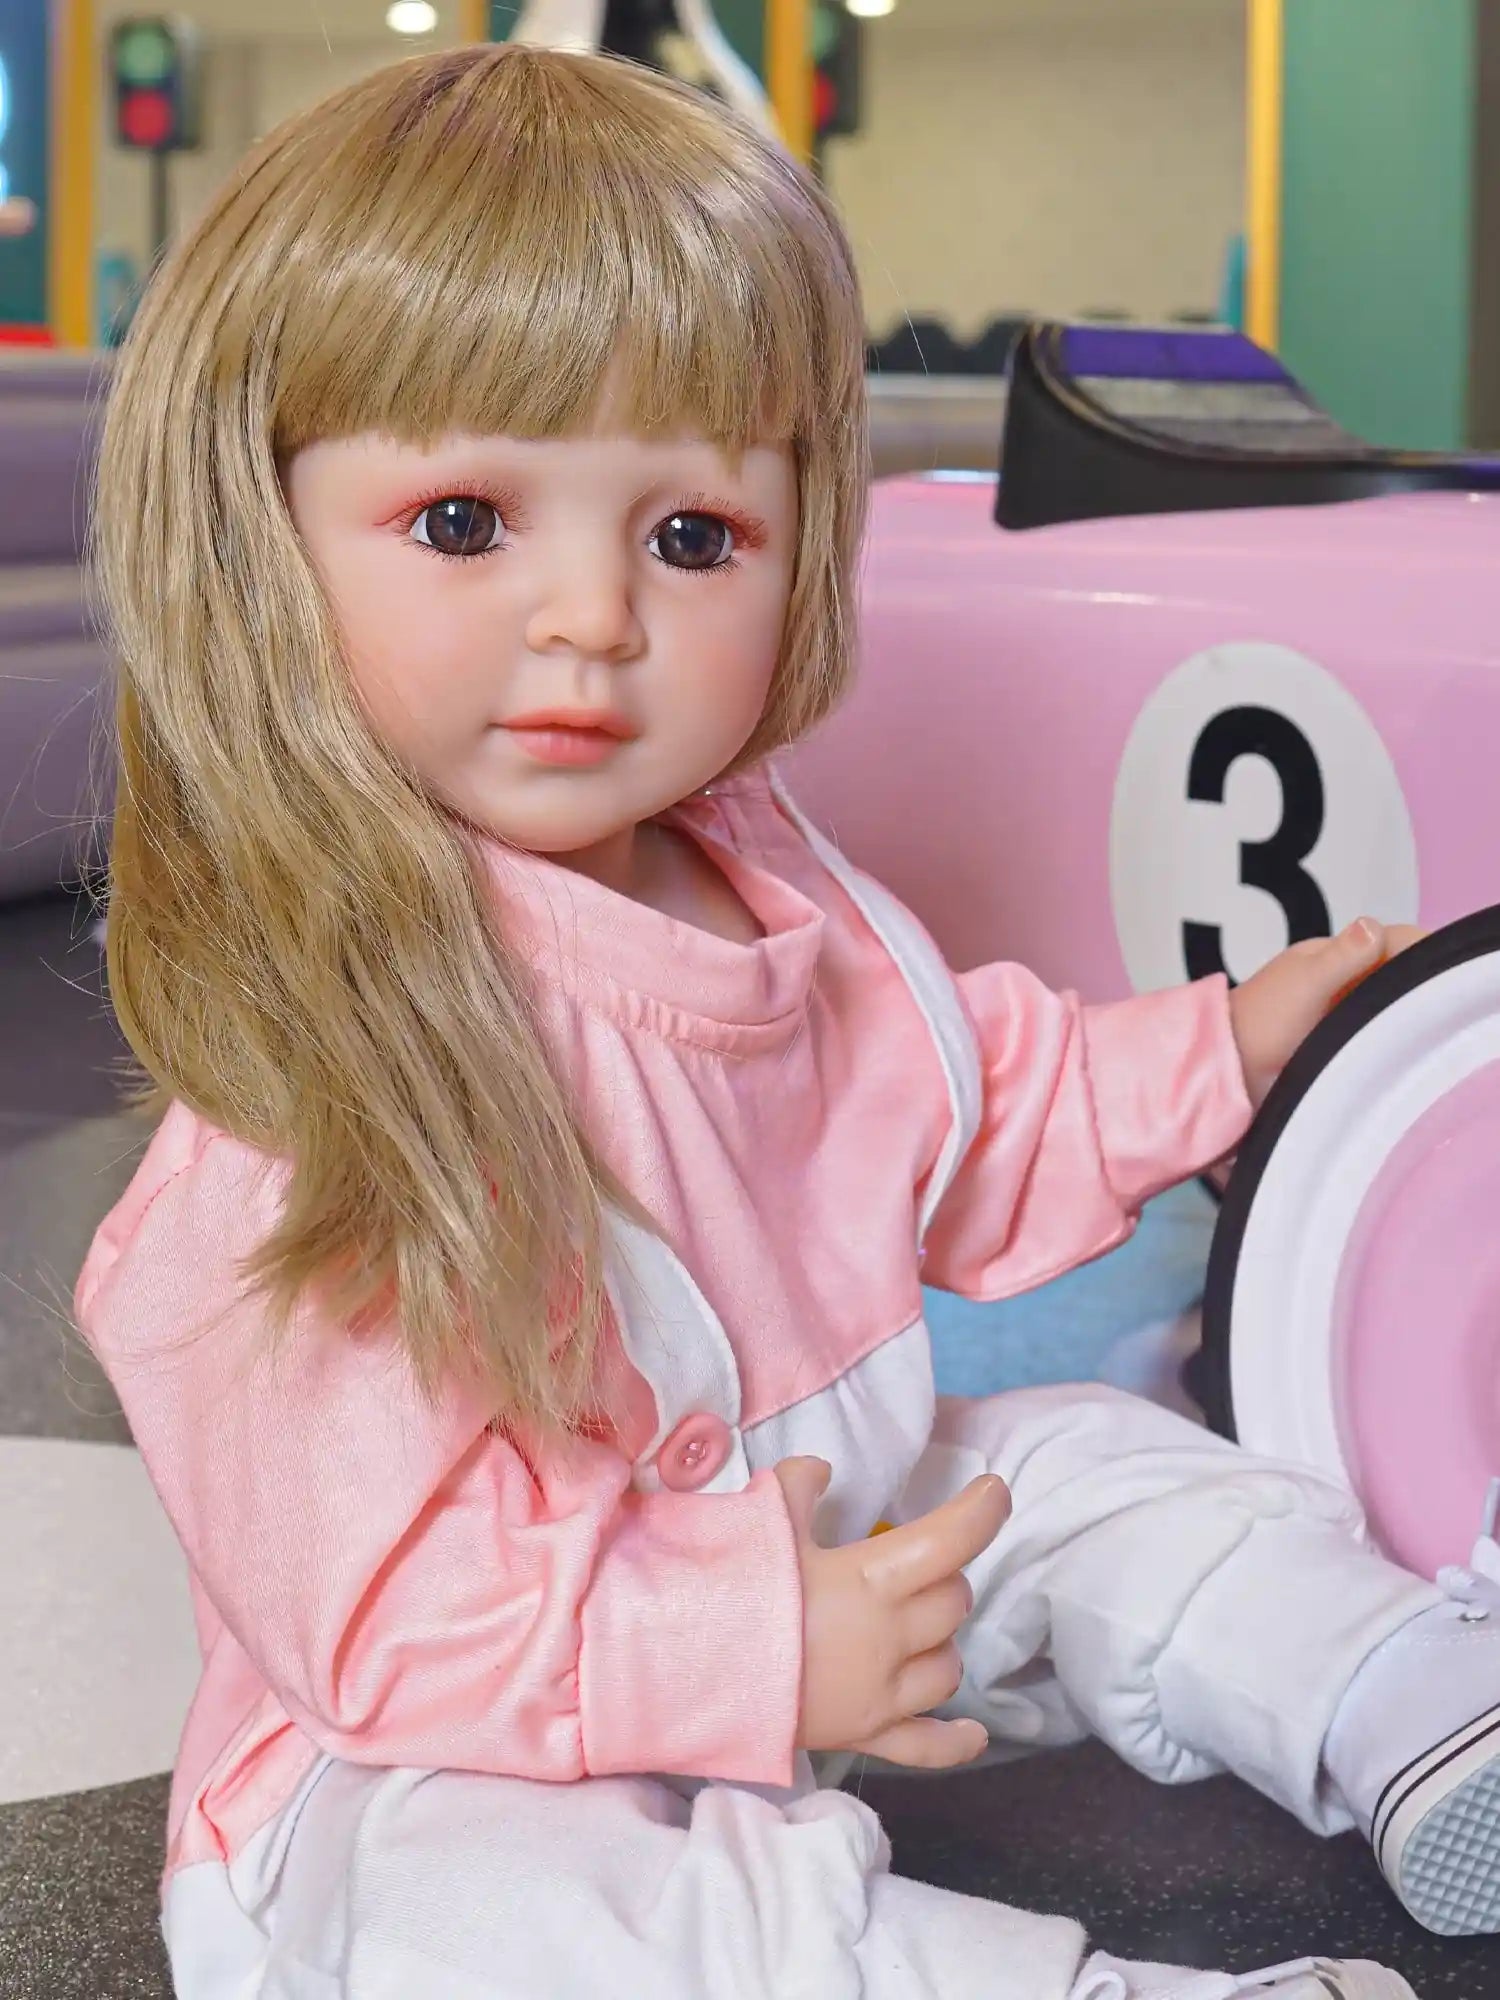 Toddler doll capturing a candid moment of playtime, in comfortable attire, with a pink toy vehicle to her side.